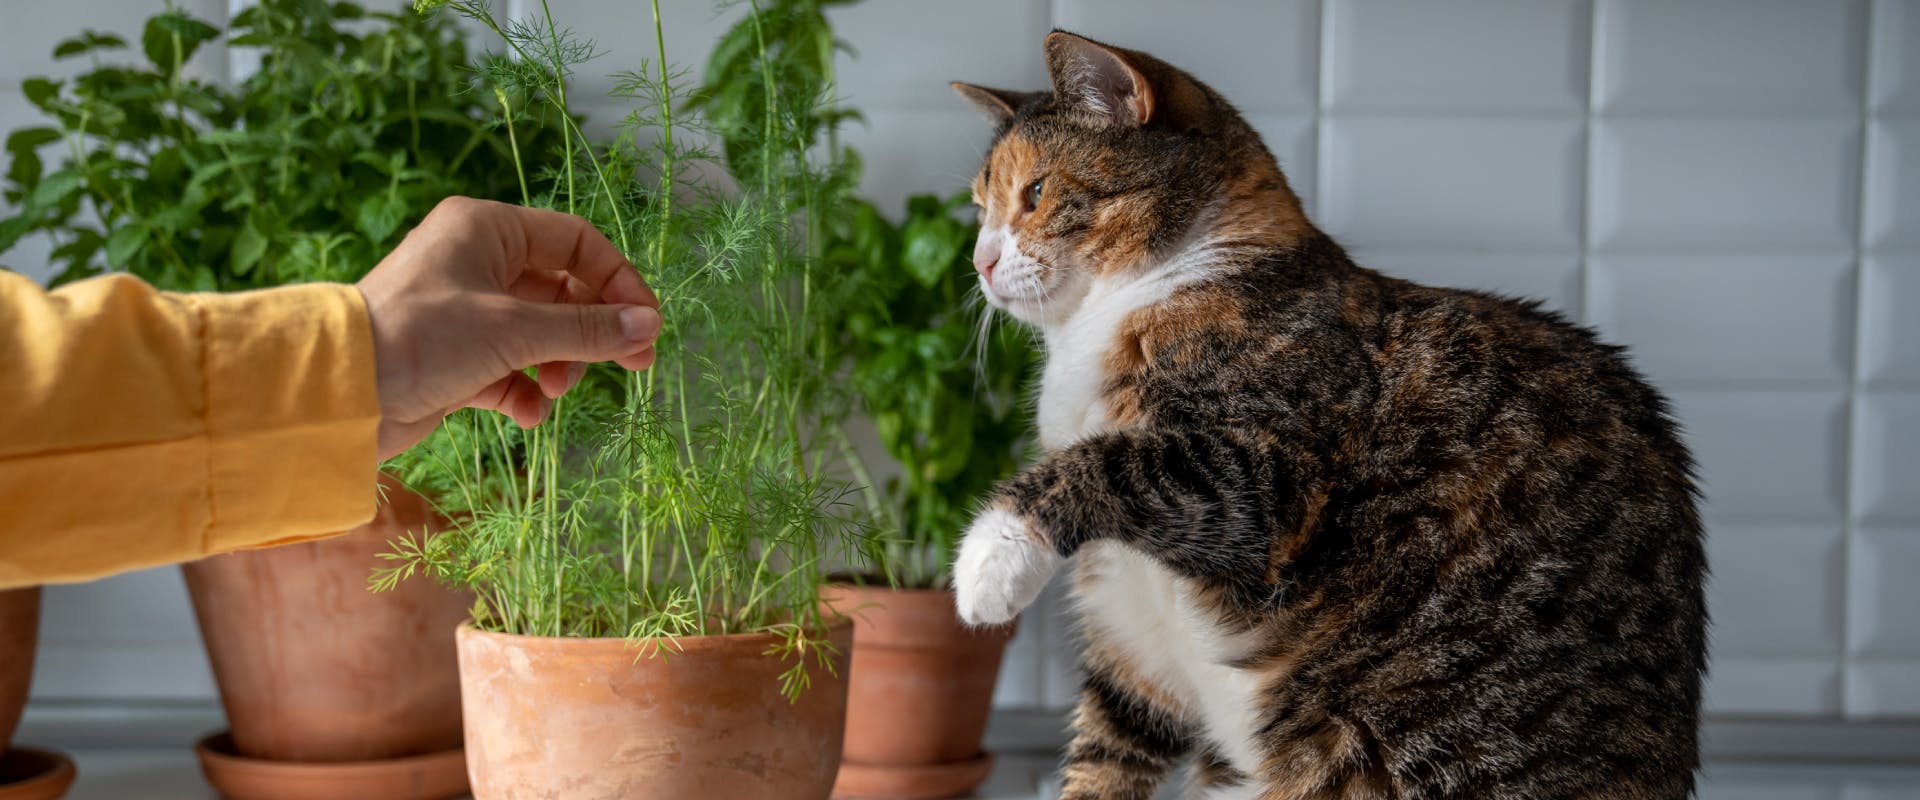 a calico cat about to use its front paw to bat away a human's hand while on a kitchen counter in front of some pot plants